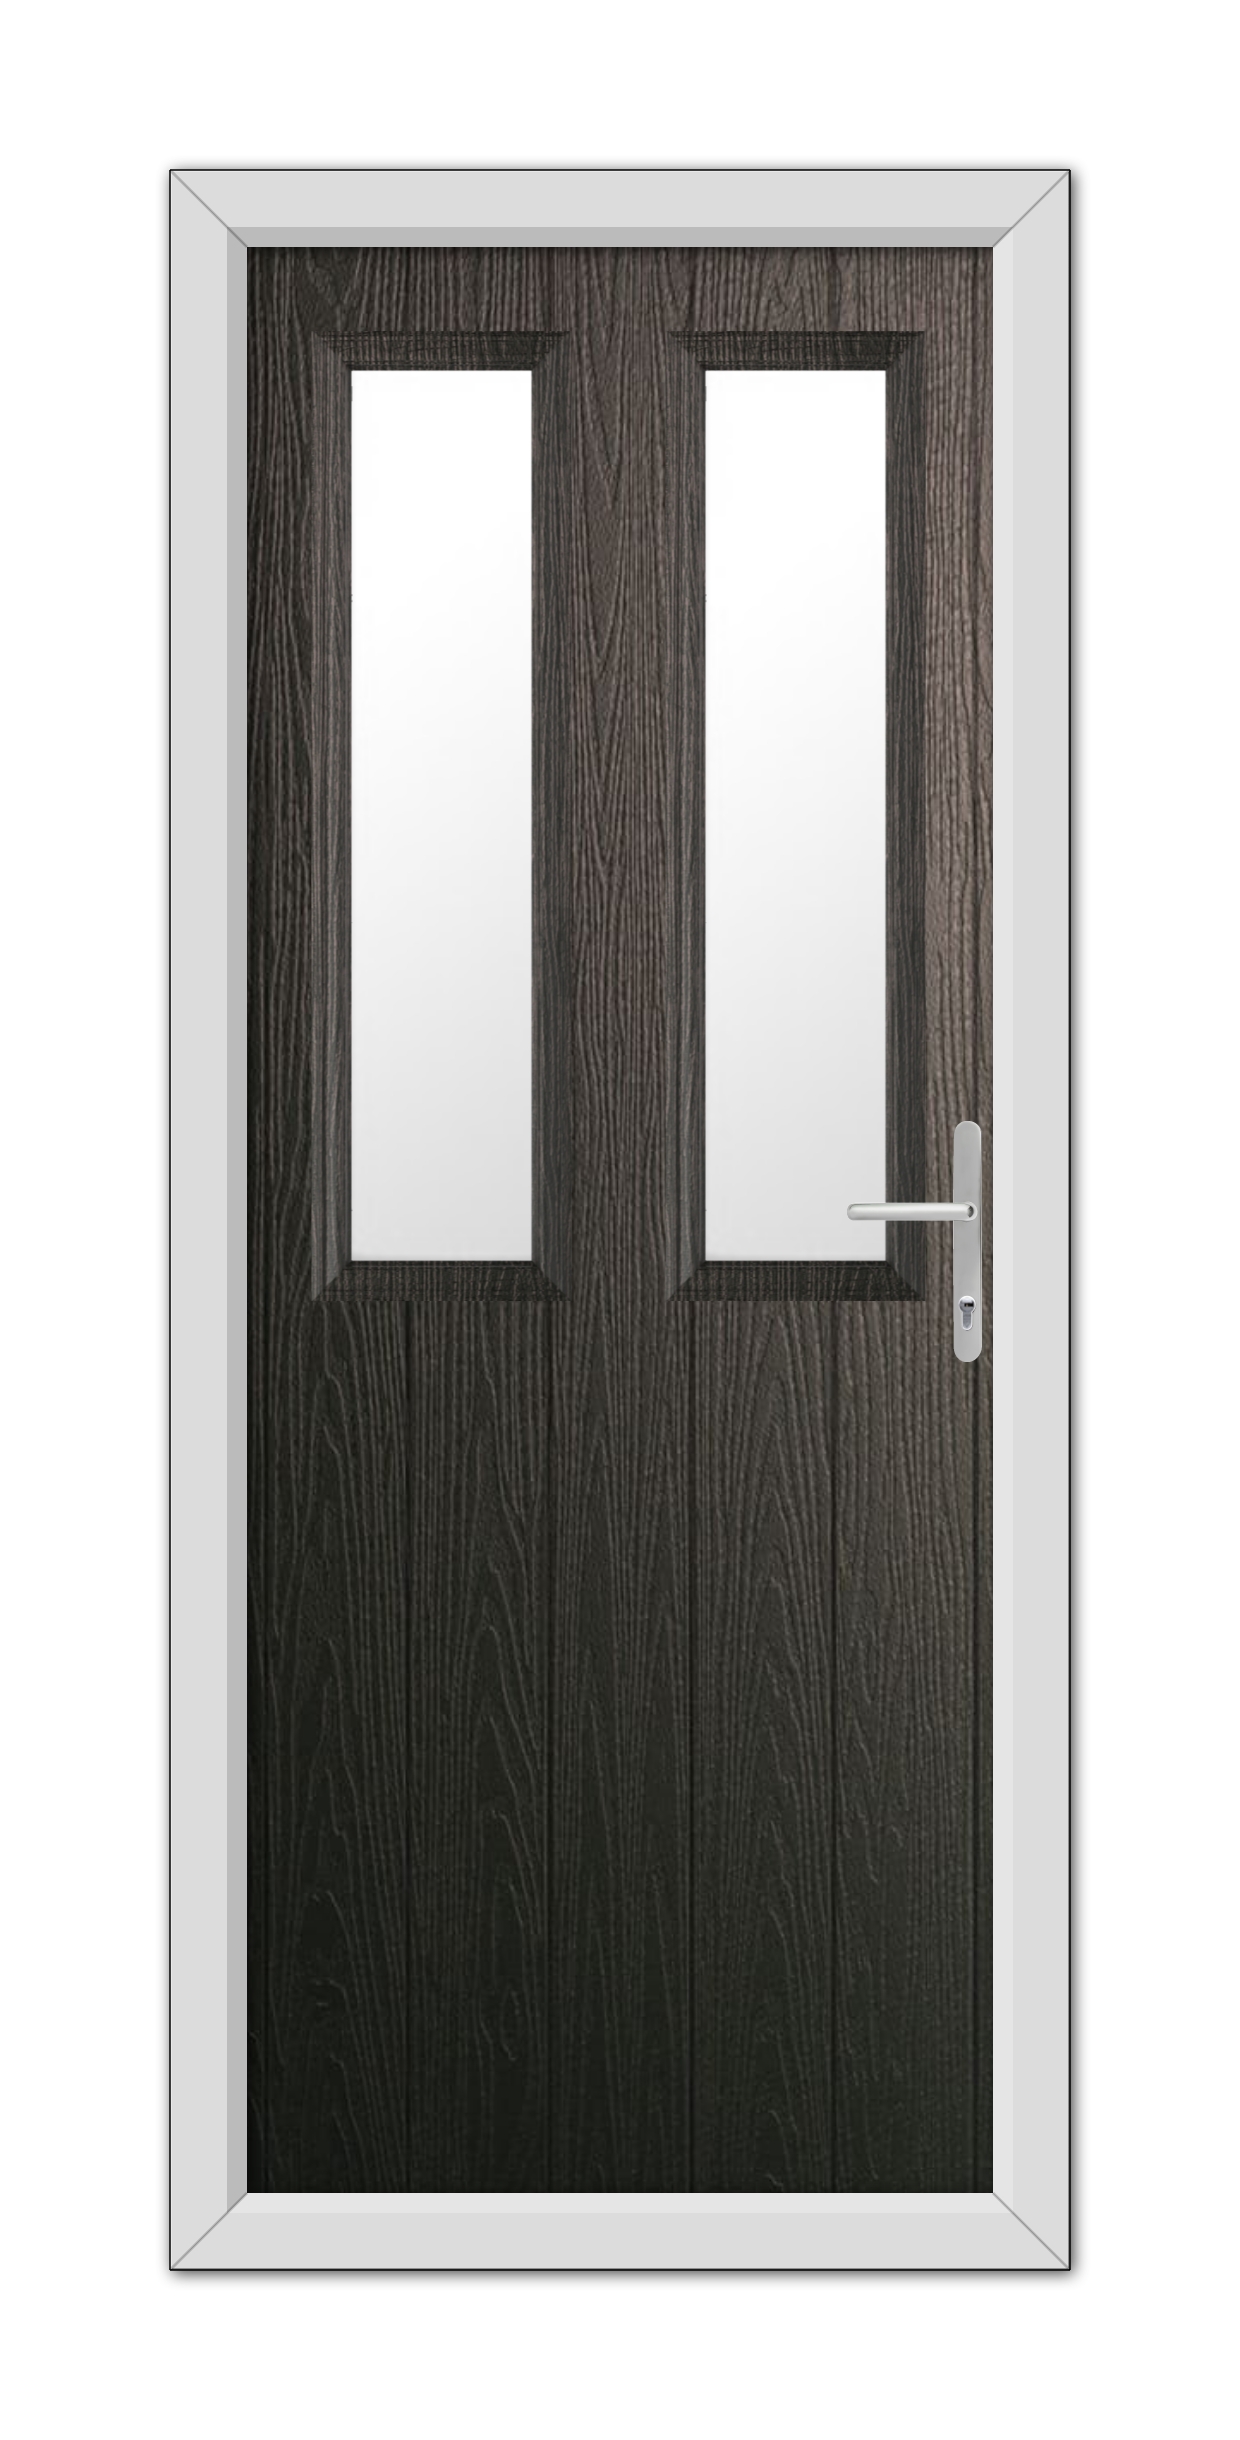 A modern Schwarzbraun Wellington Composite Door 48mm Timber Core with vertical glass panels and a white frame, featuring a stainless steel handle.